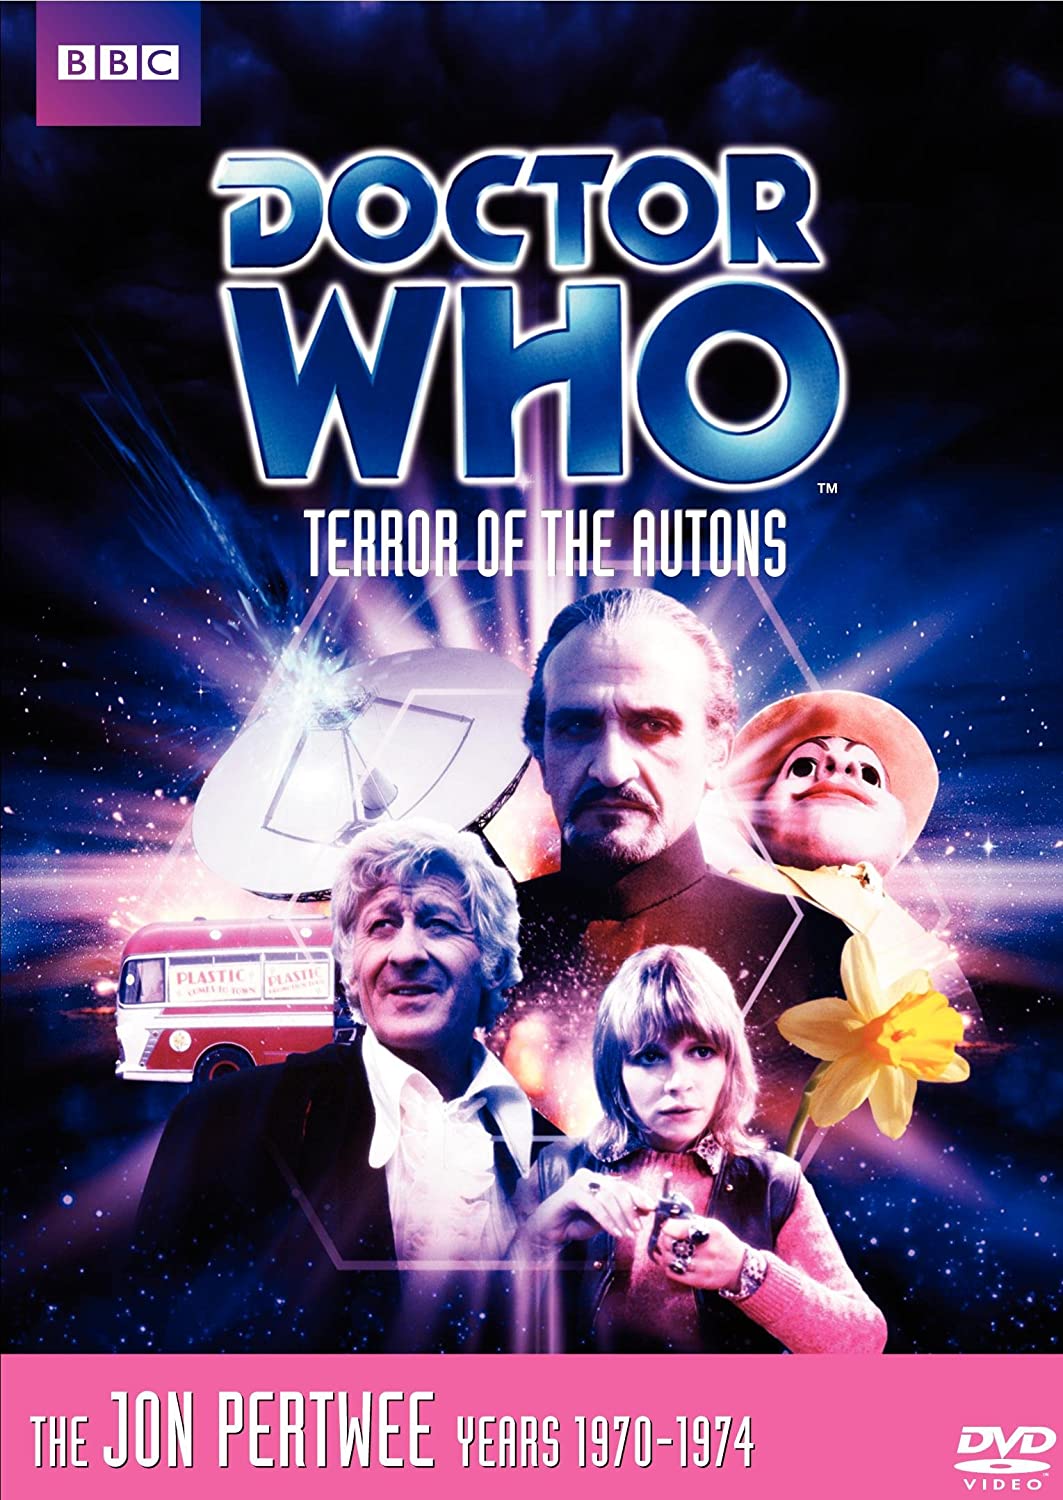 In Terror of the Autons, the Master attempts to use an army of Autons to conquer Earth. Unless the Doctor, Jo Grant, and UNIT can stop him, of course.